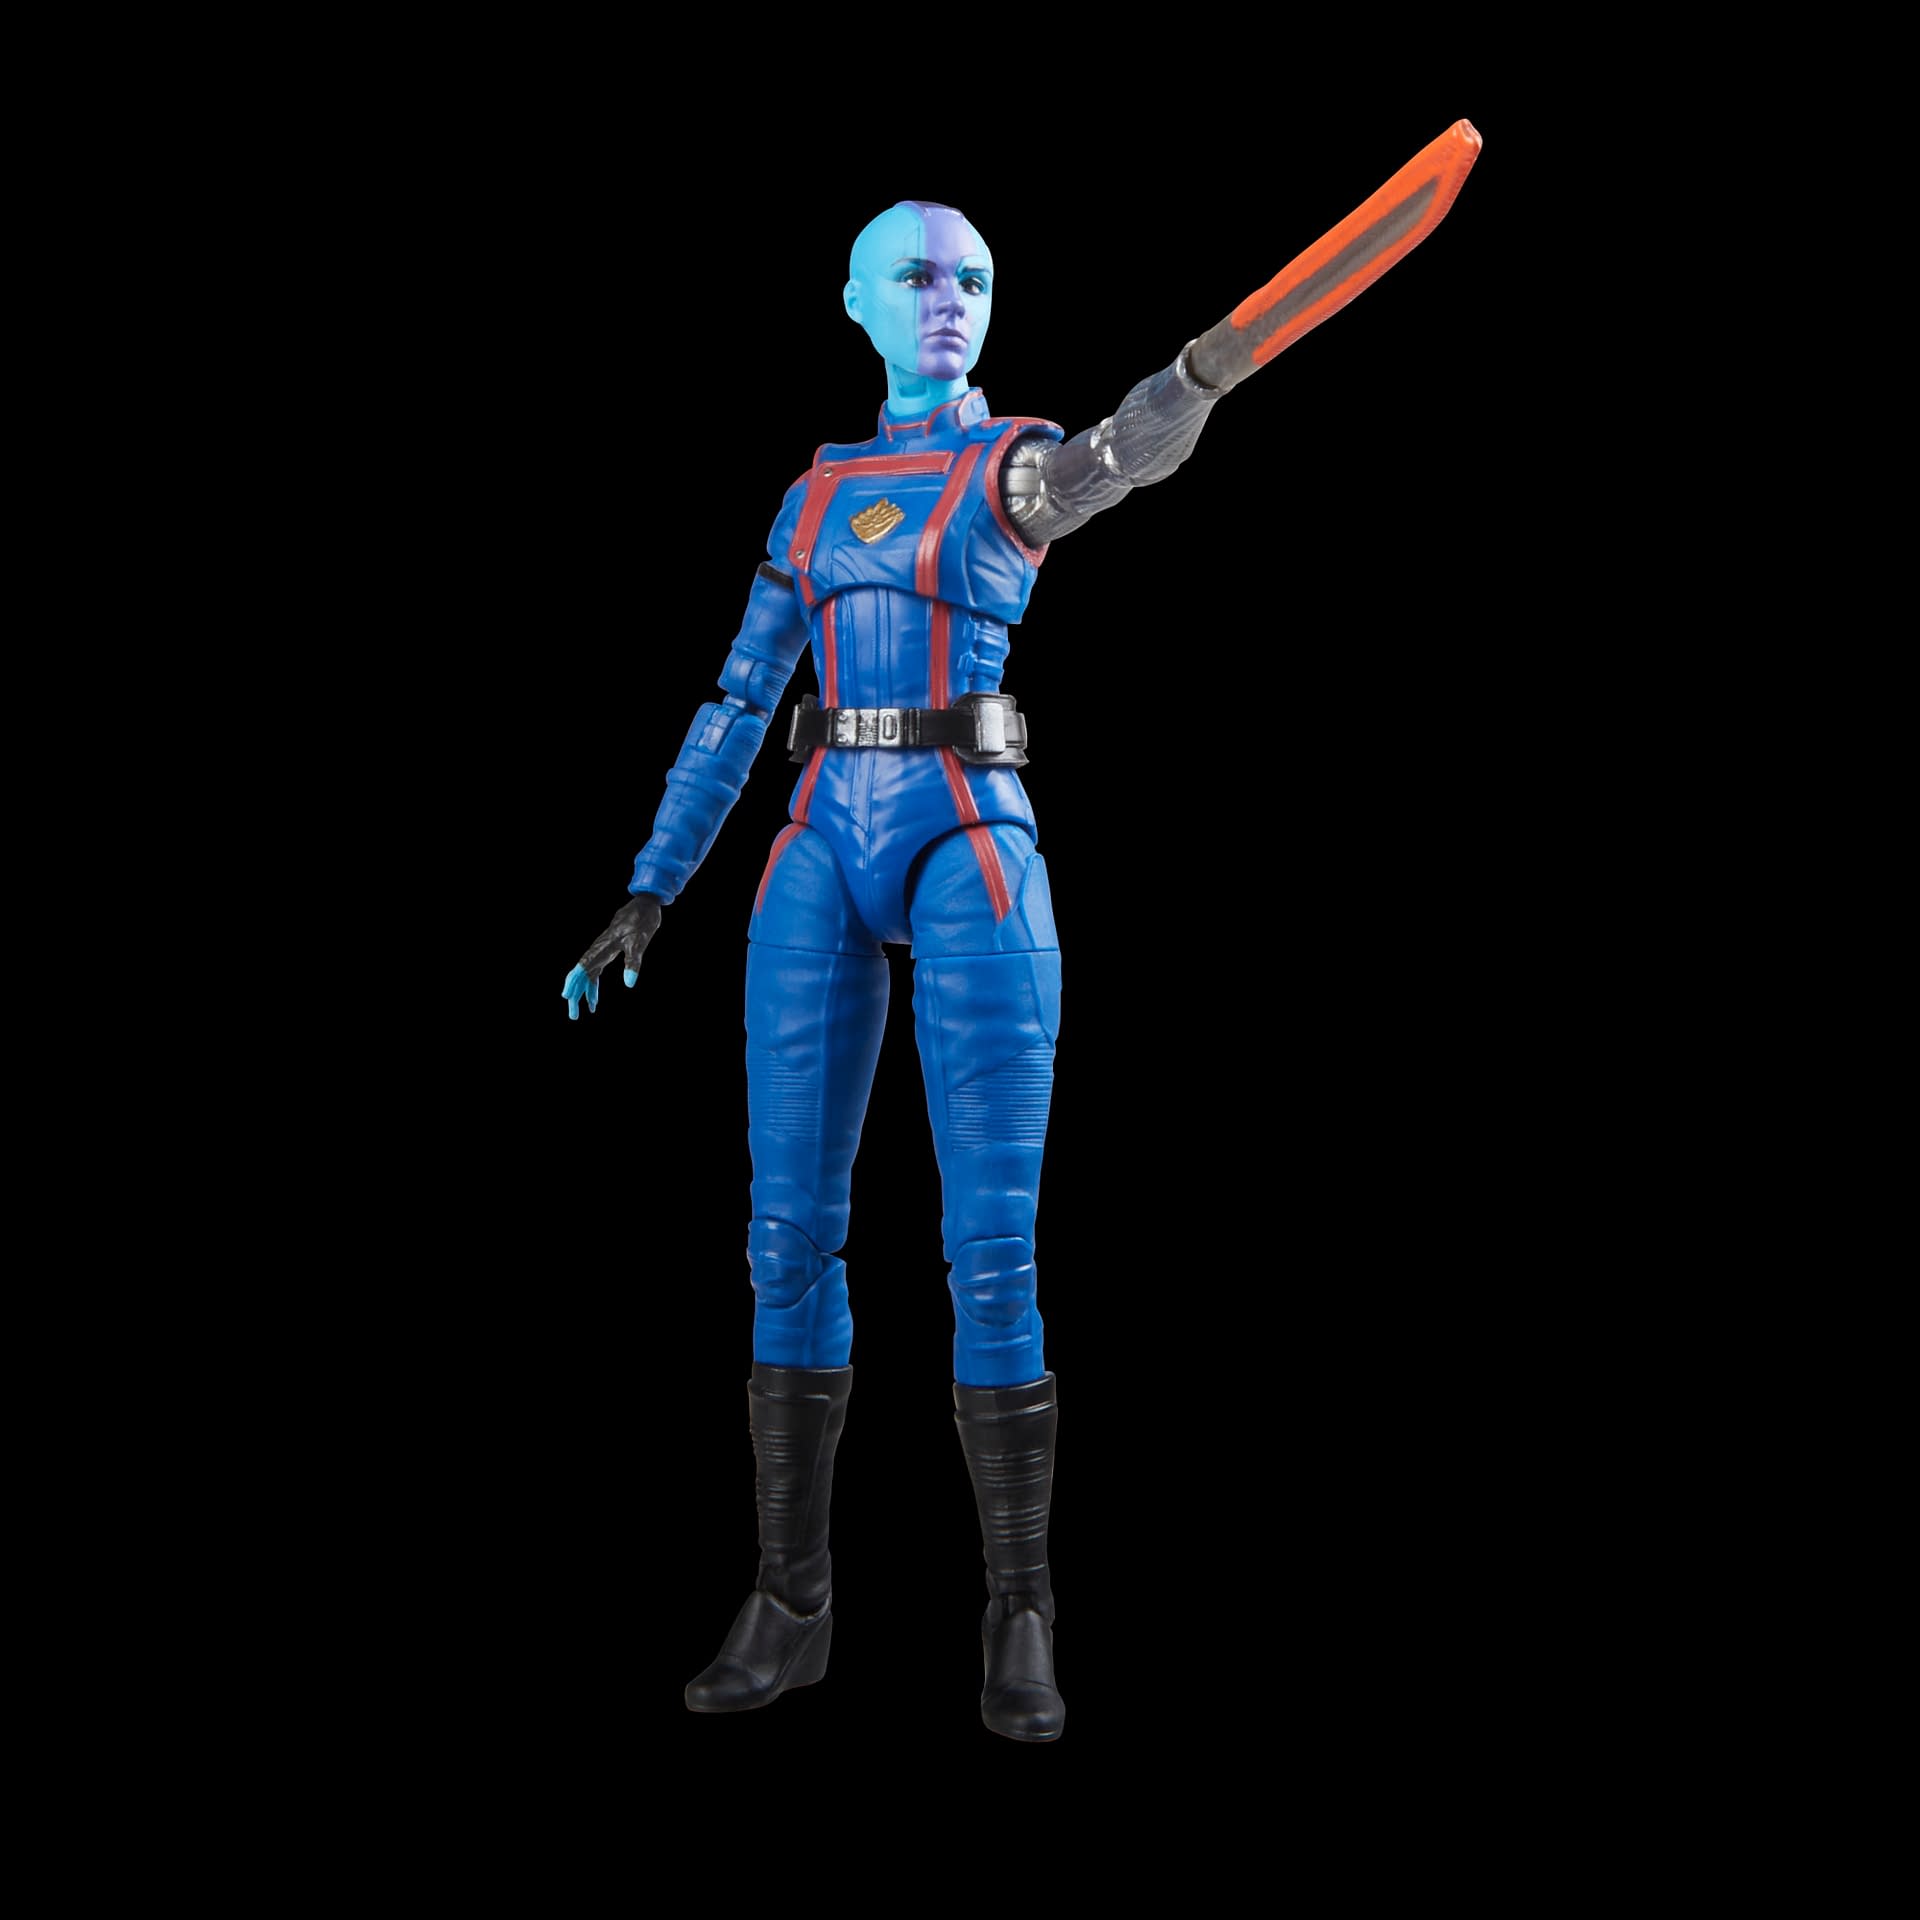 Nebula Joins the Guardians Crew with Hasbro's GOTG Marvel Legends